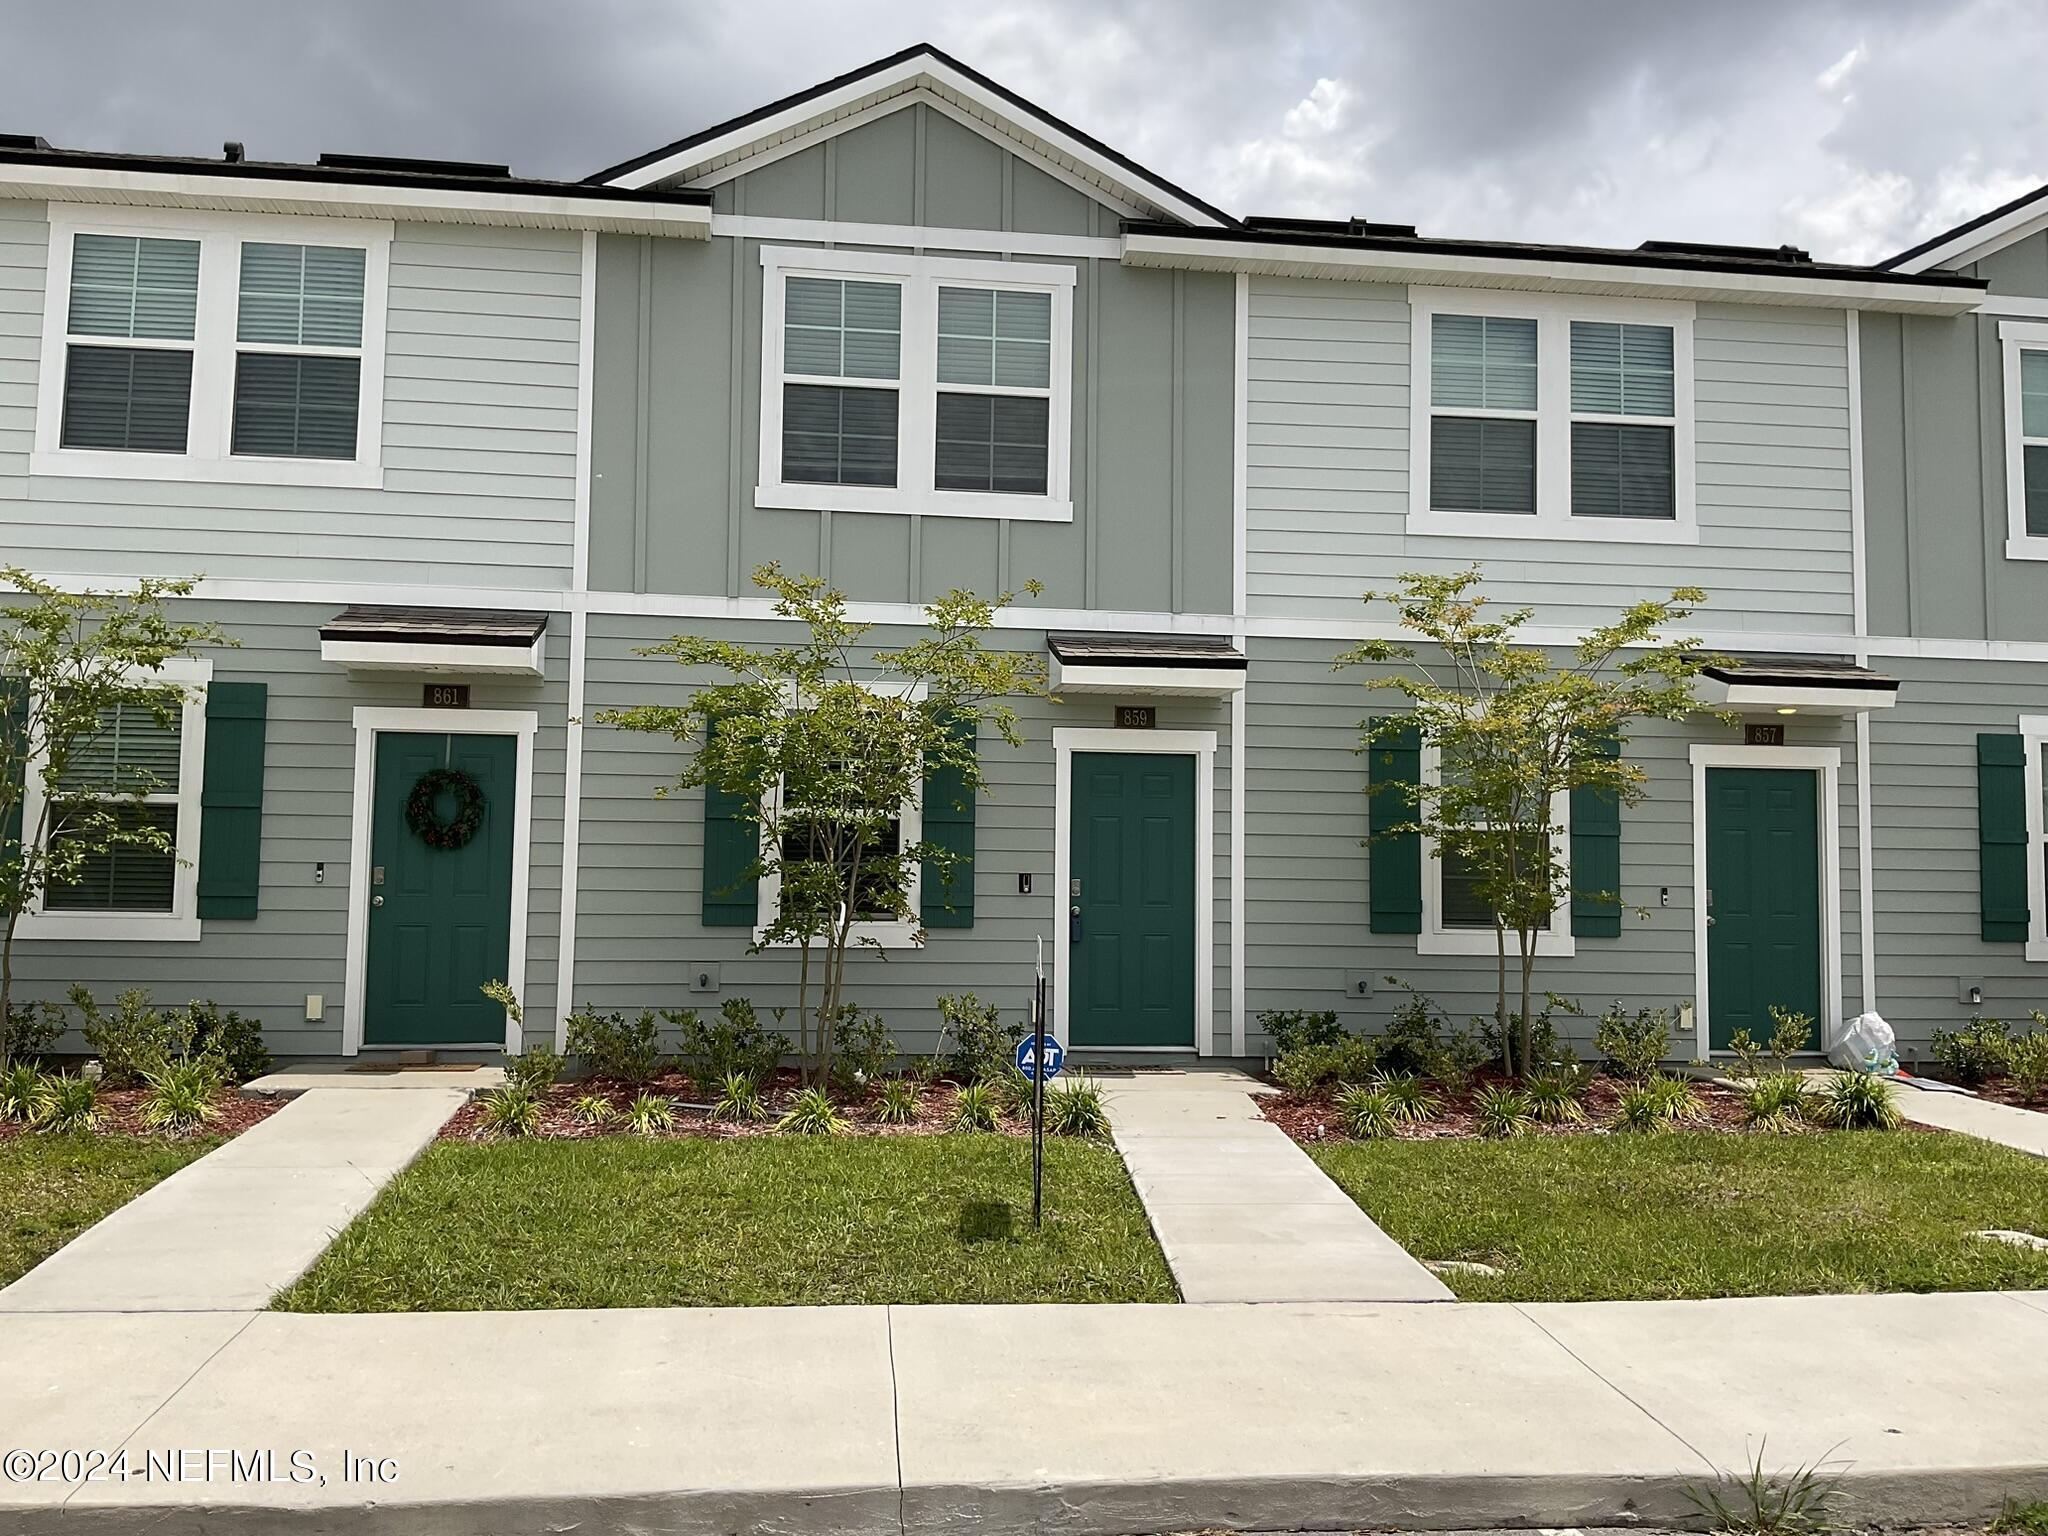 View Jacksonville, FL 32211 townhome